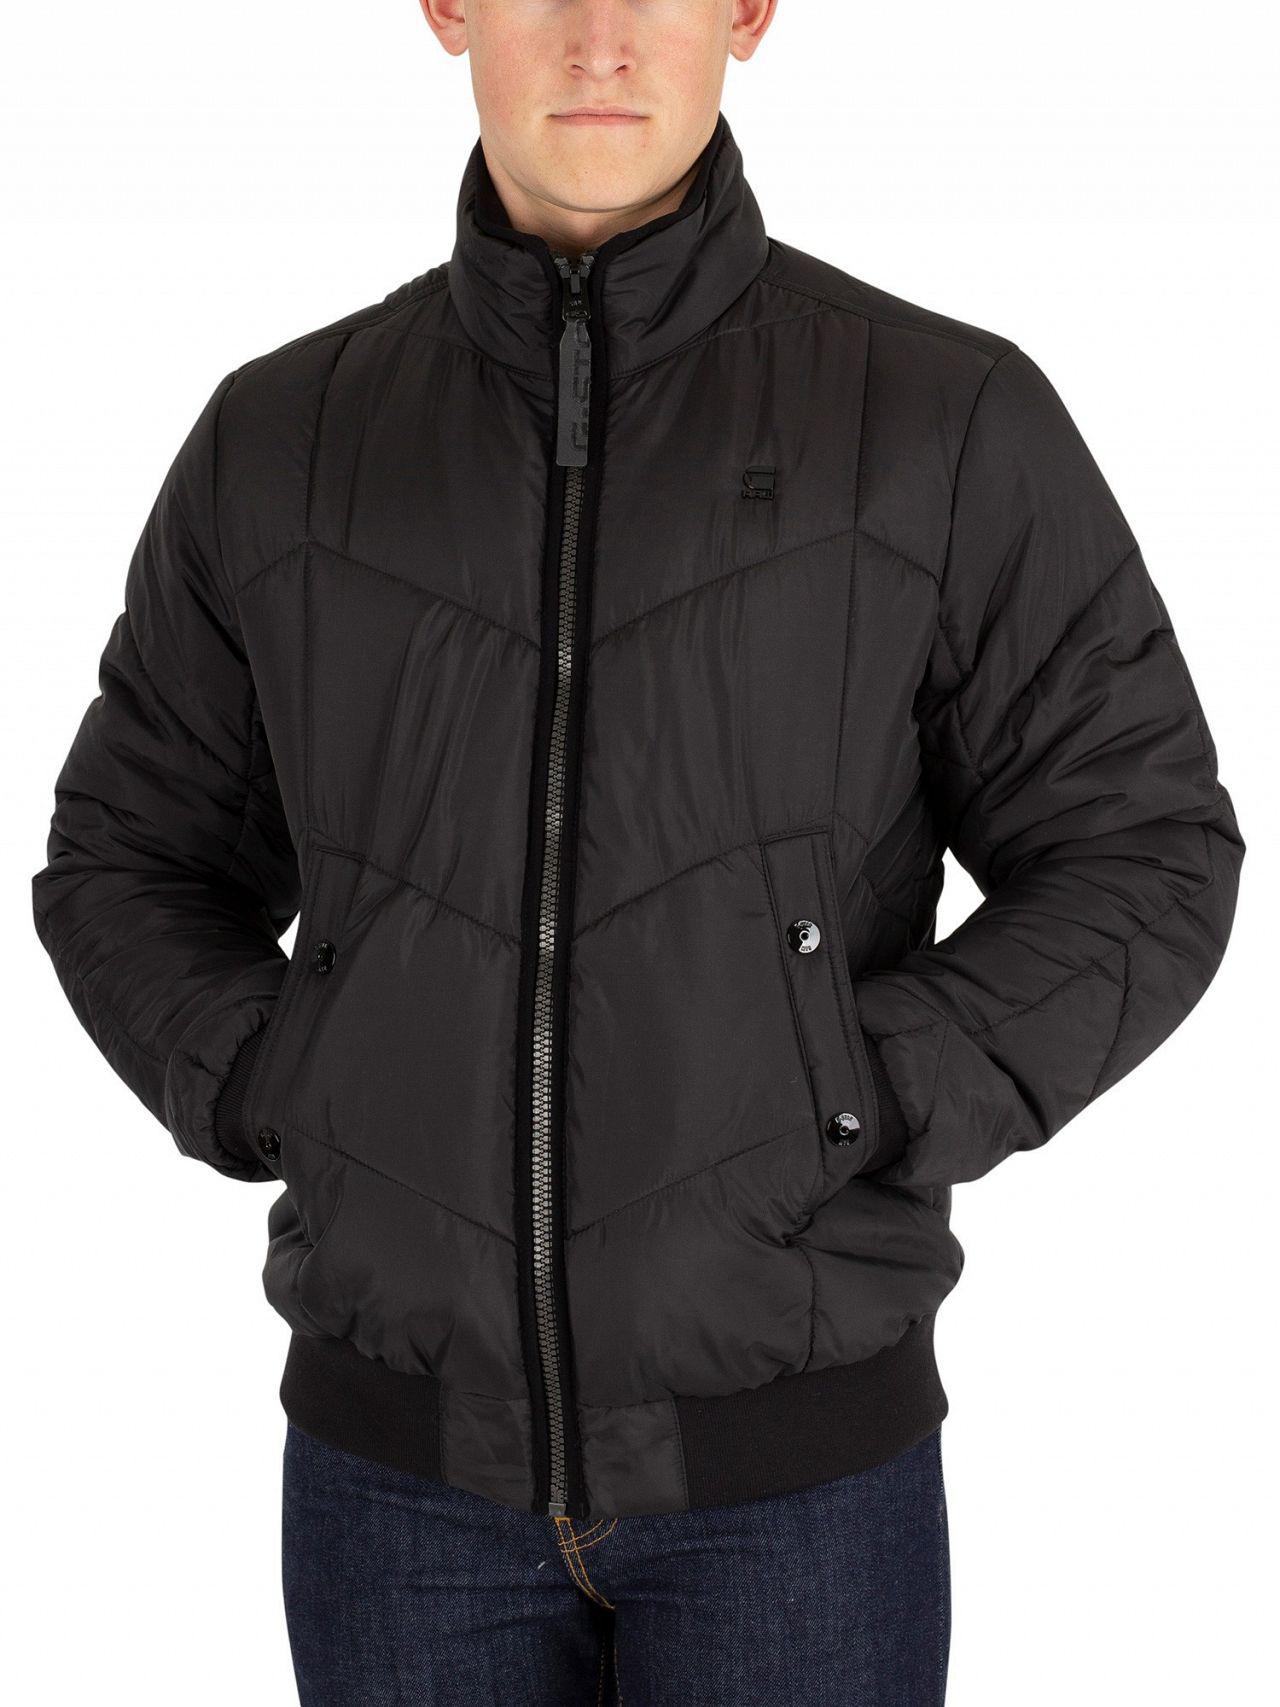 G-Star RAW Synthetic Whistler Meefic Jacket in Black for Men - Lyst